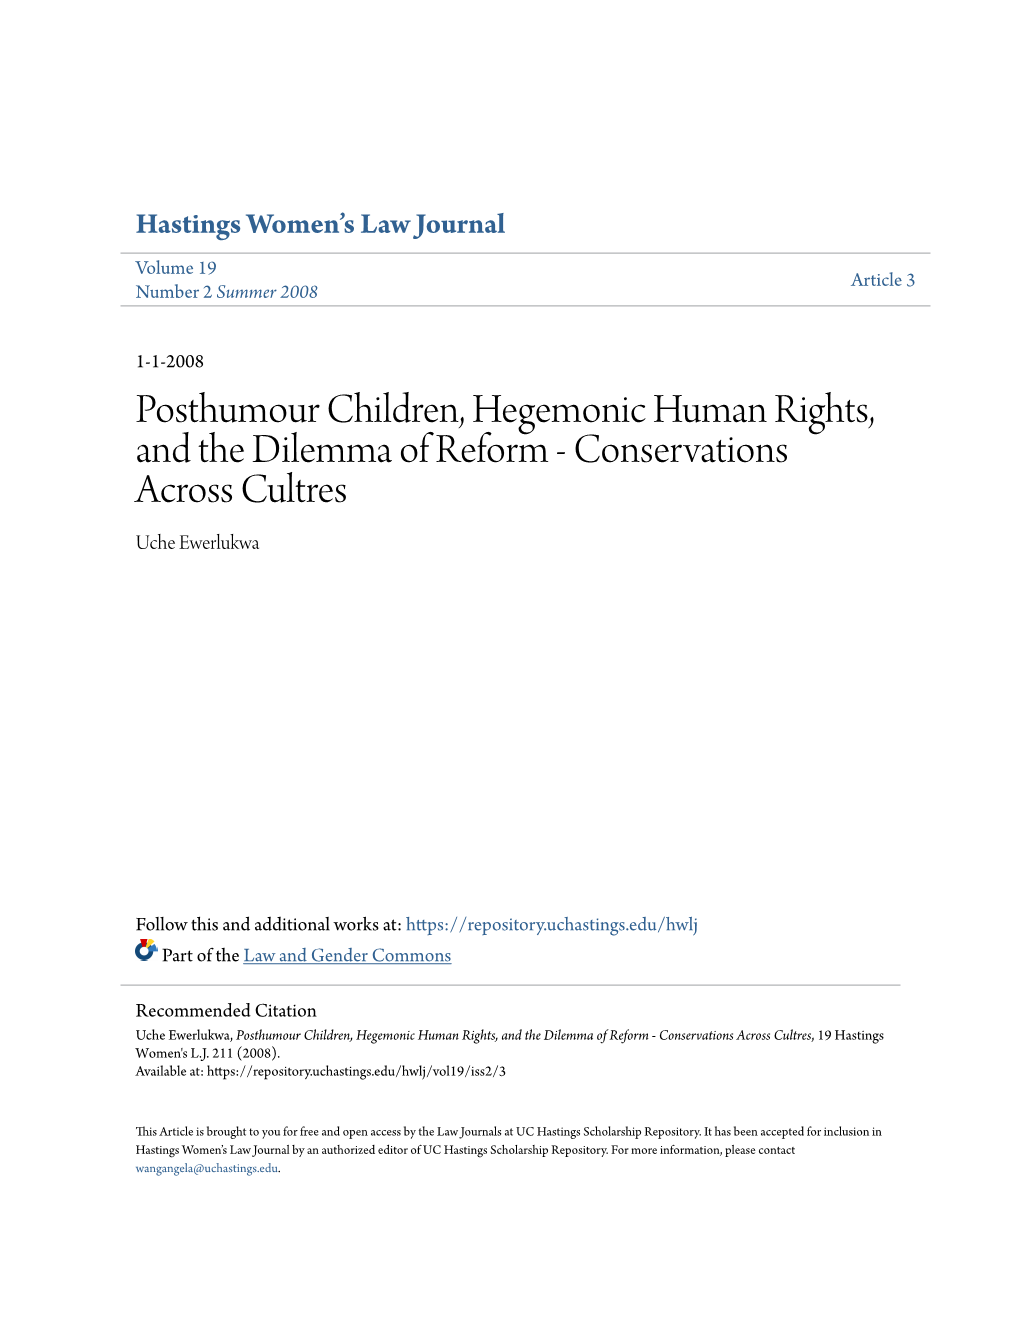 Posthumour Children, Hegemonic Human Rights, and the Dilemma of Reform - Conservations Across Cultres Uche Ewerlukwa